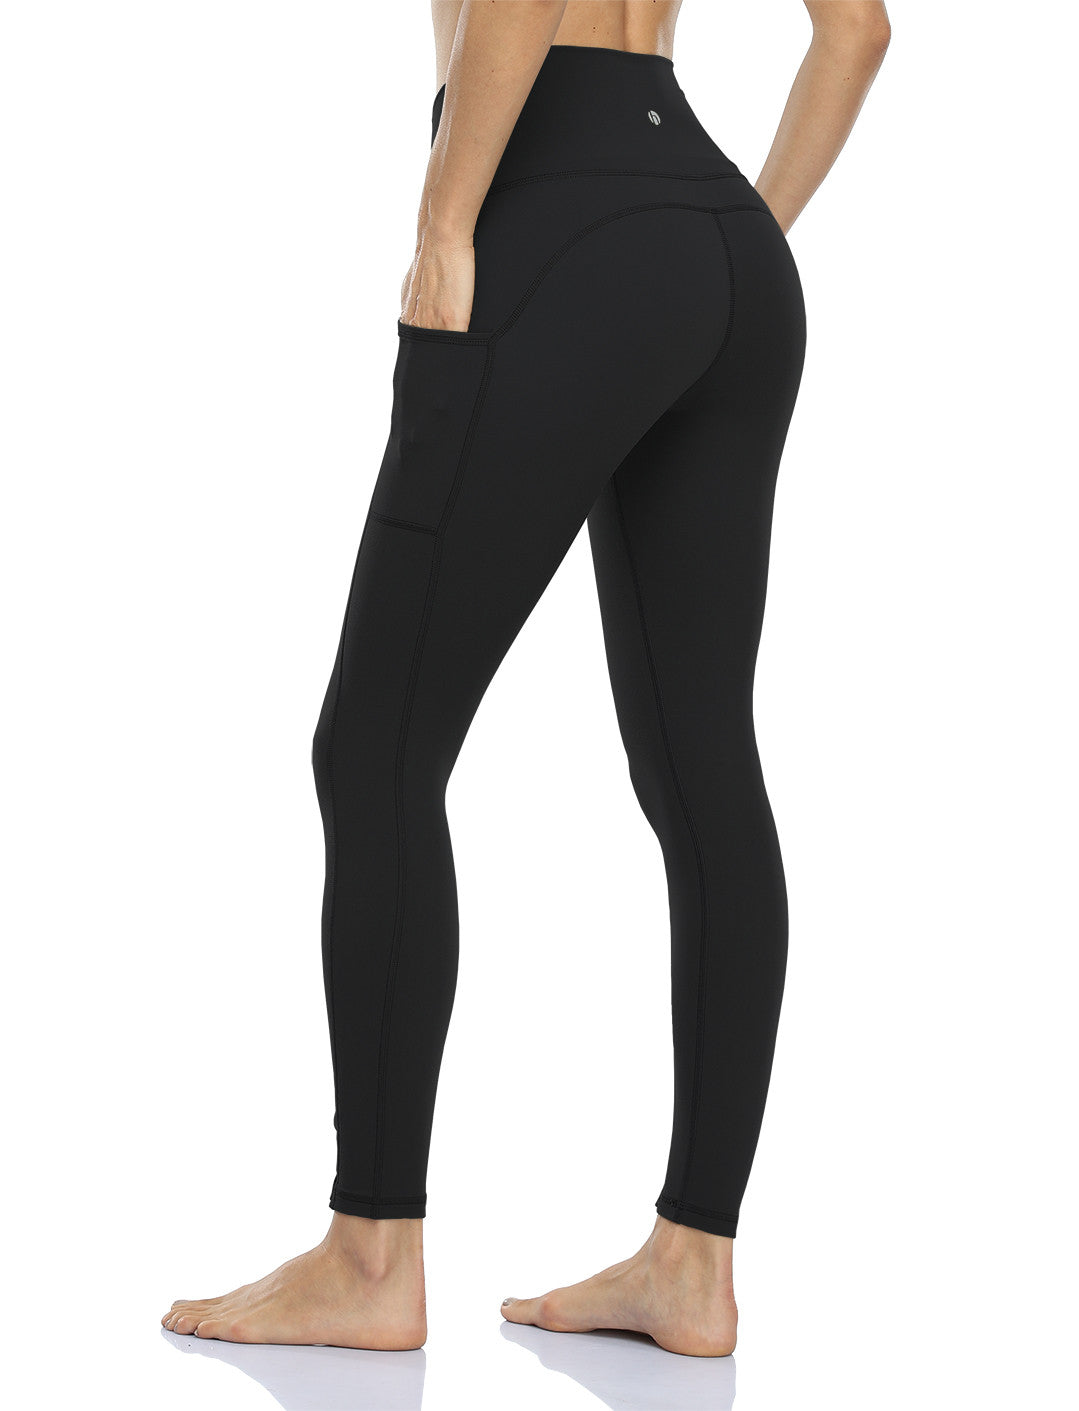 HeyNuts EssentialWorkout Pro 78 Leggings, High India